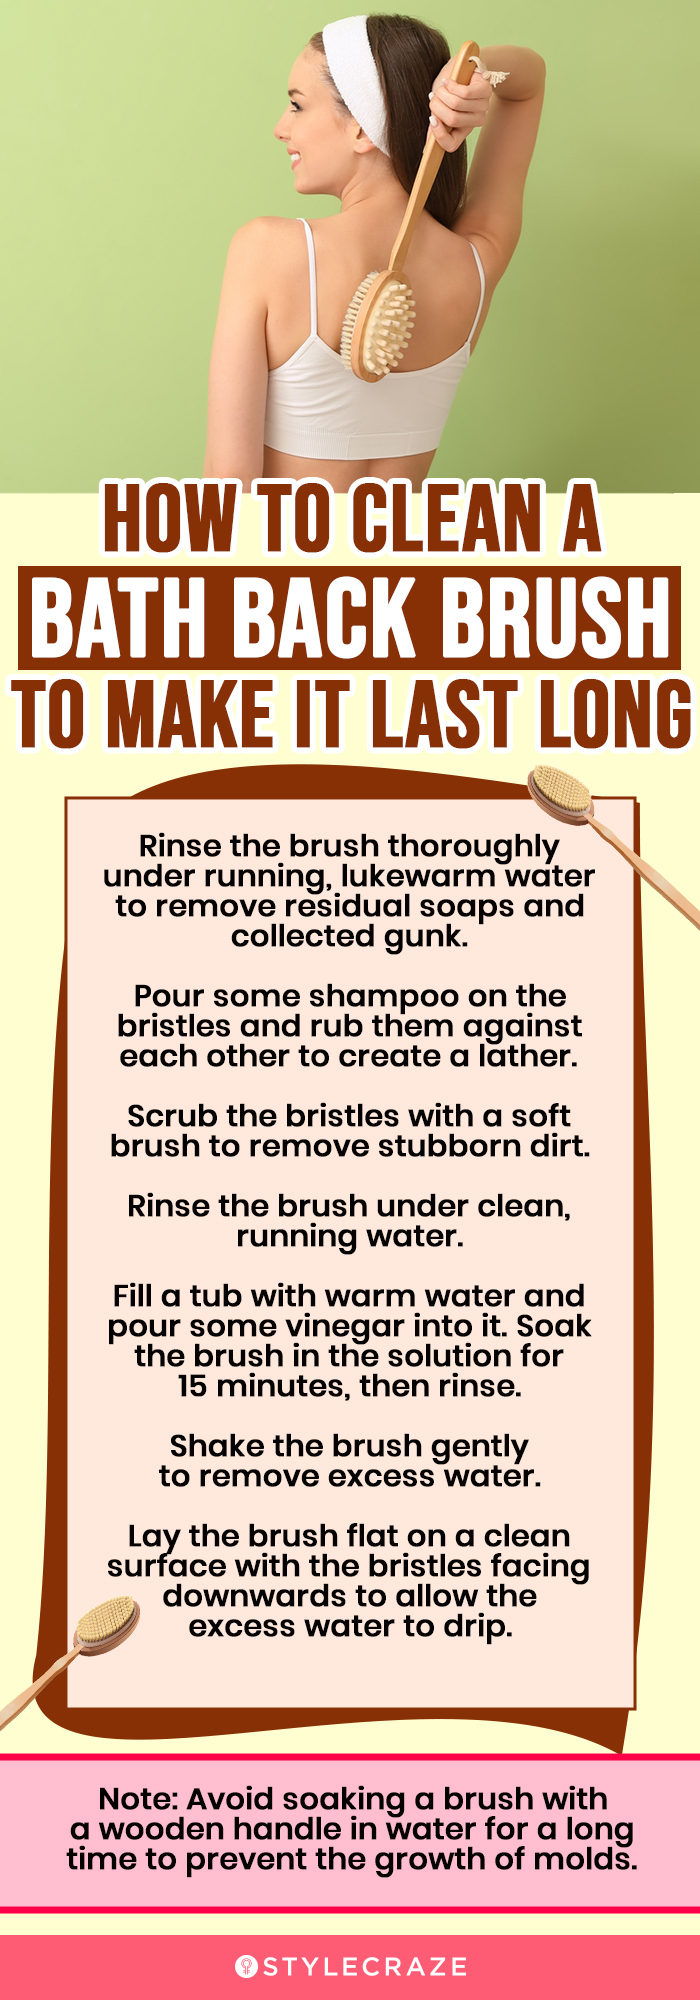 How To Clean A Bath Back Brush To Make It Last Long (infographic)